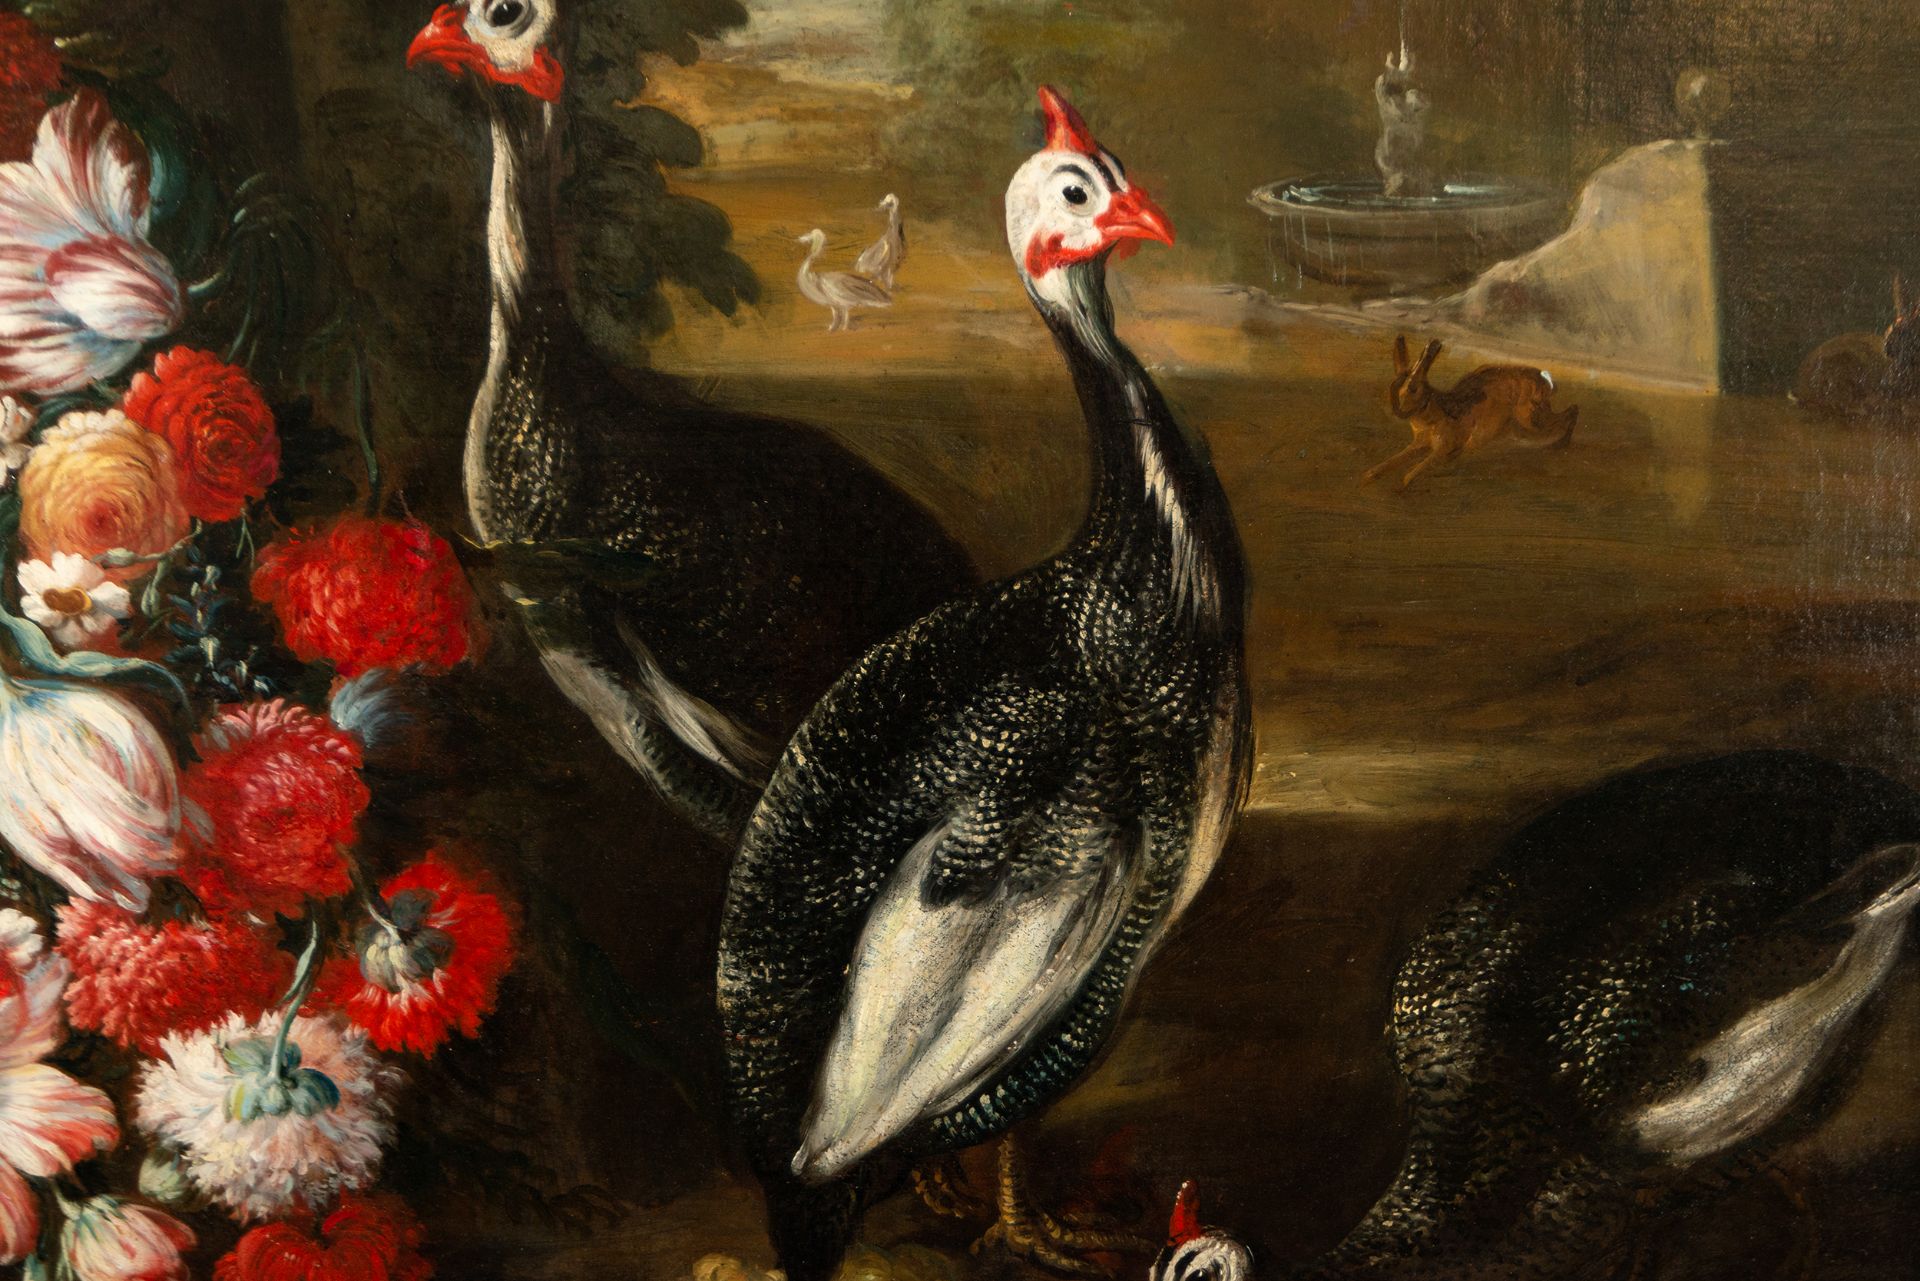 Large Pair of Still Lifes with Flowers and Birds in a Garden, 18th century Neapolitan school, Circle - Image 7 of 17